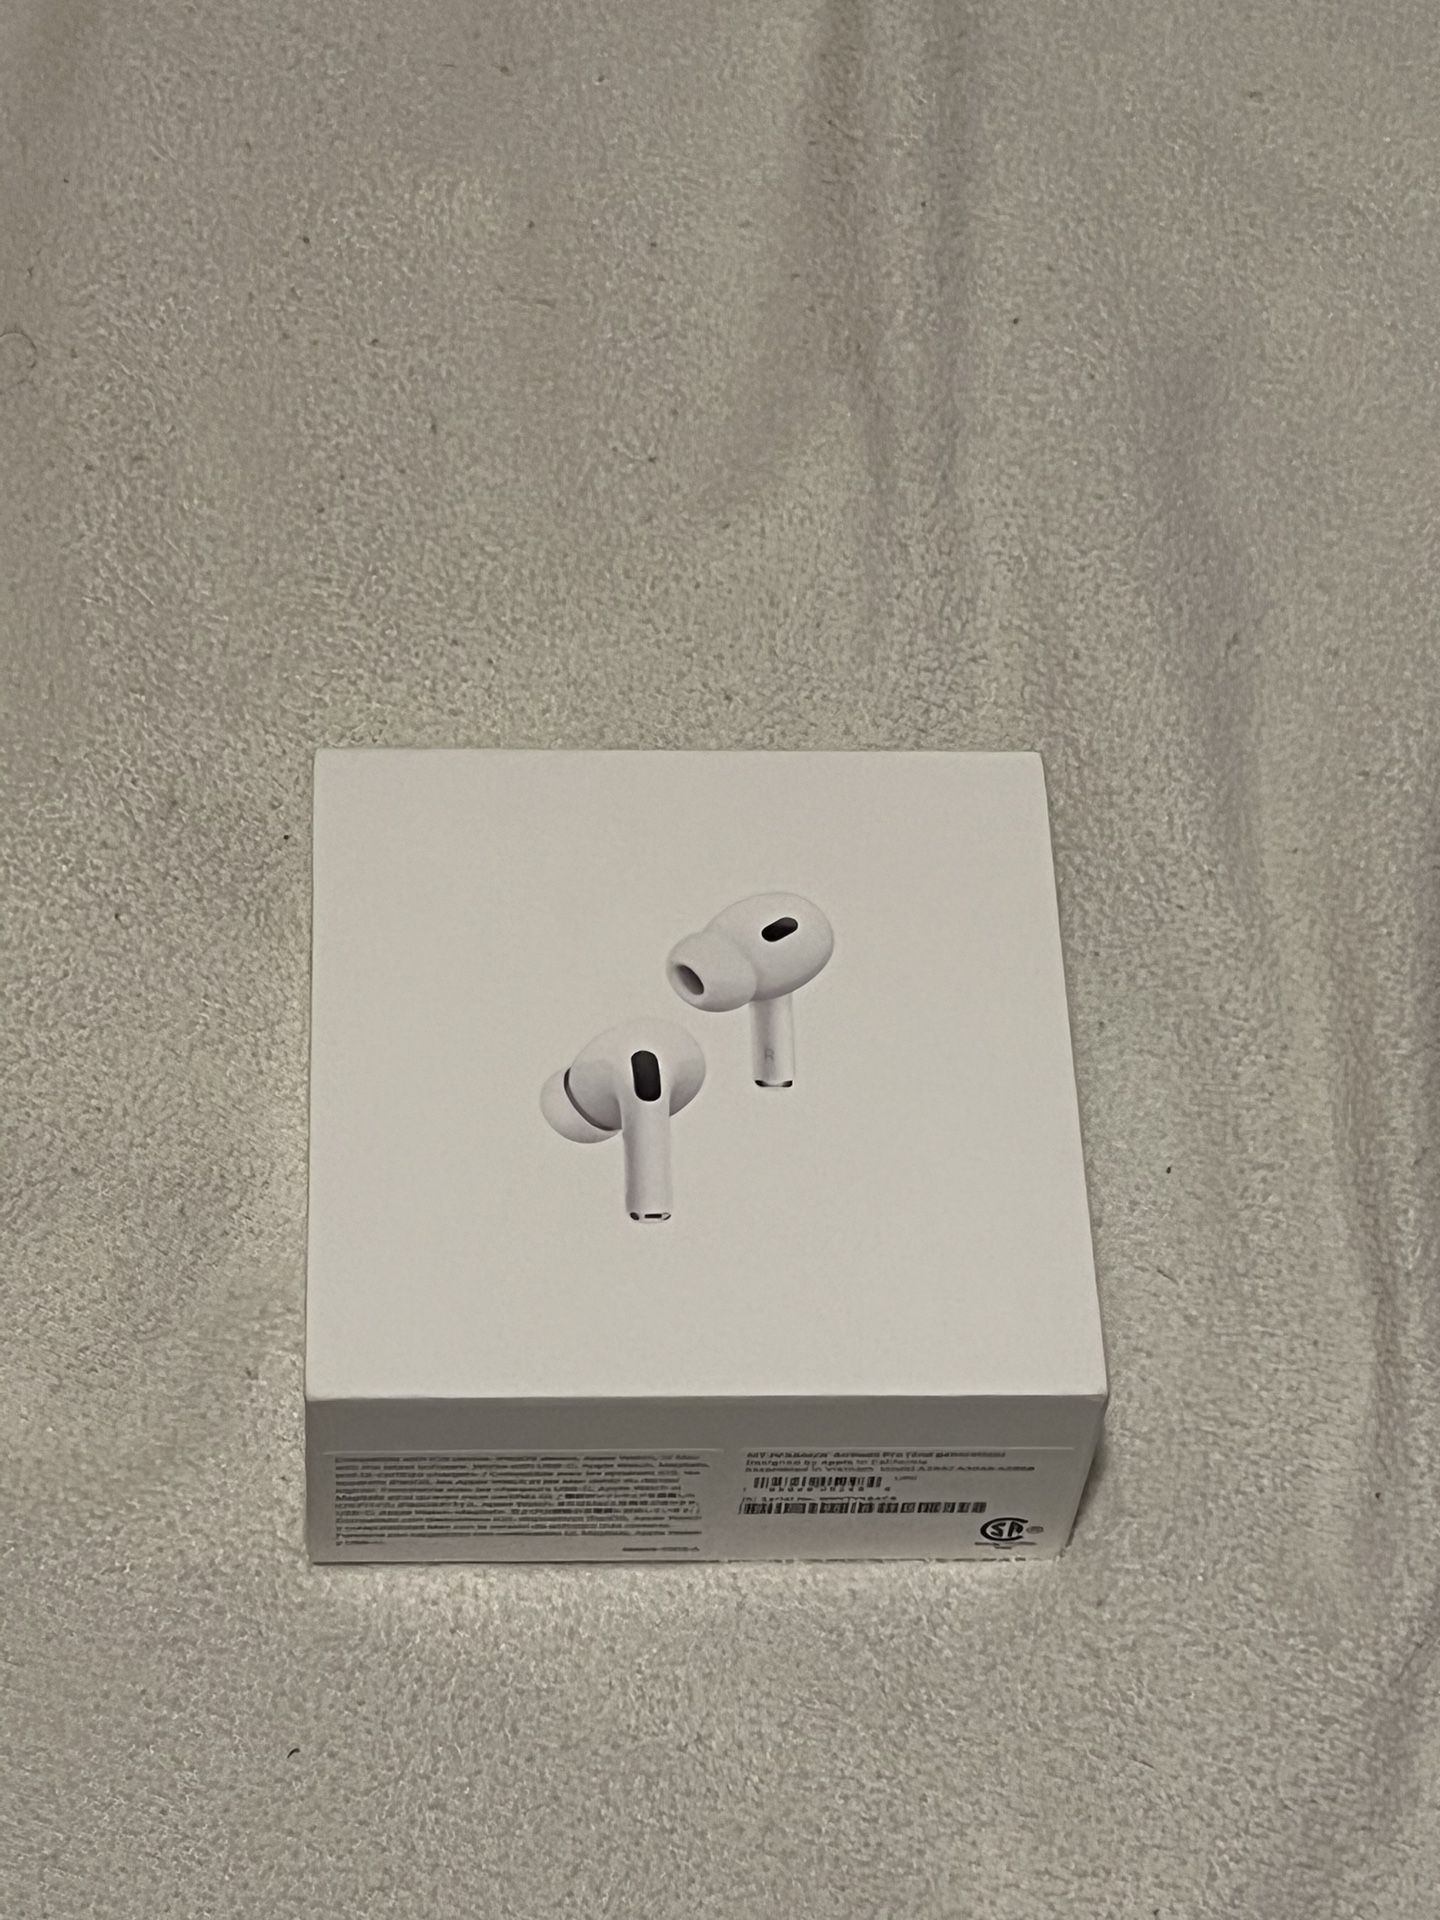 AirPods Pro 2 (USB-C) With AppleCare+ Warranty 